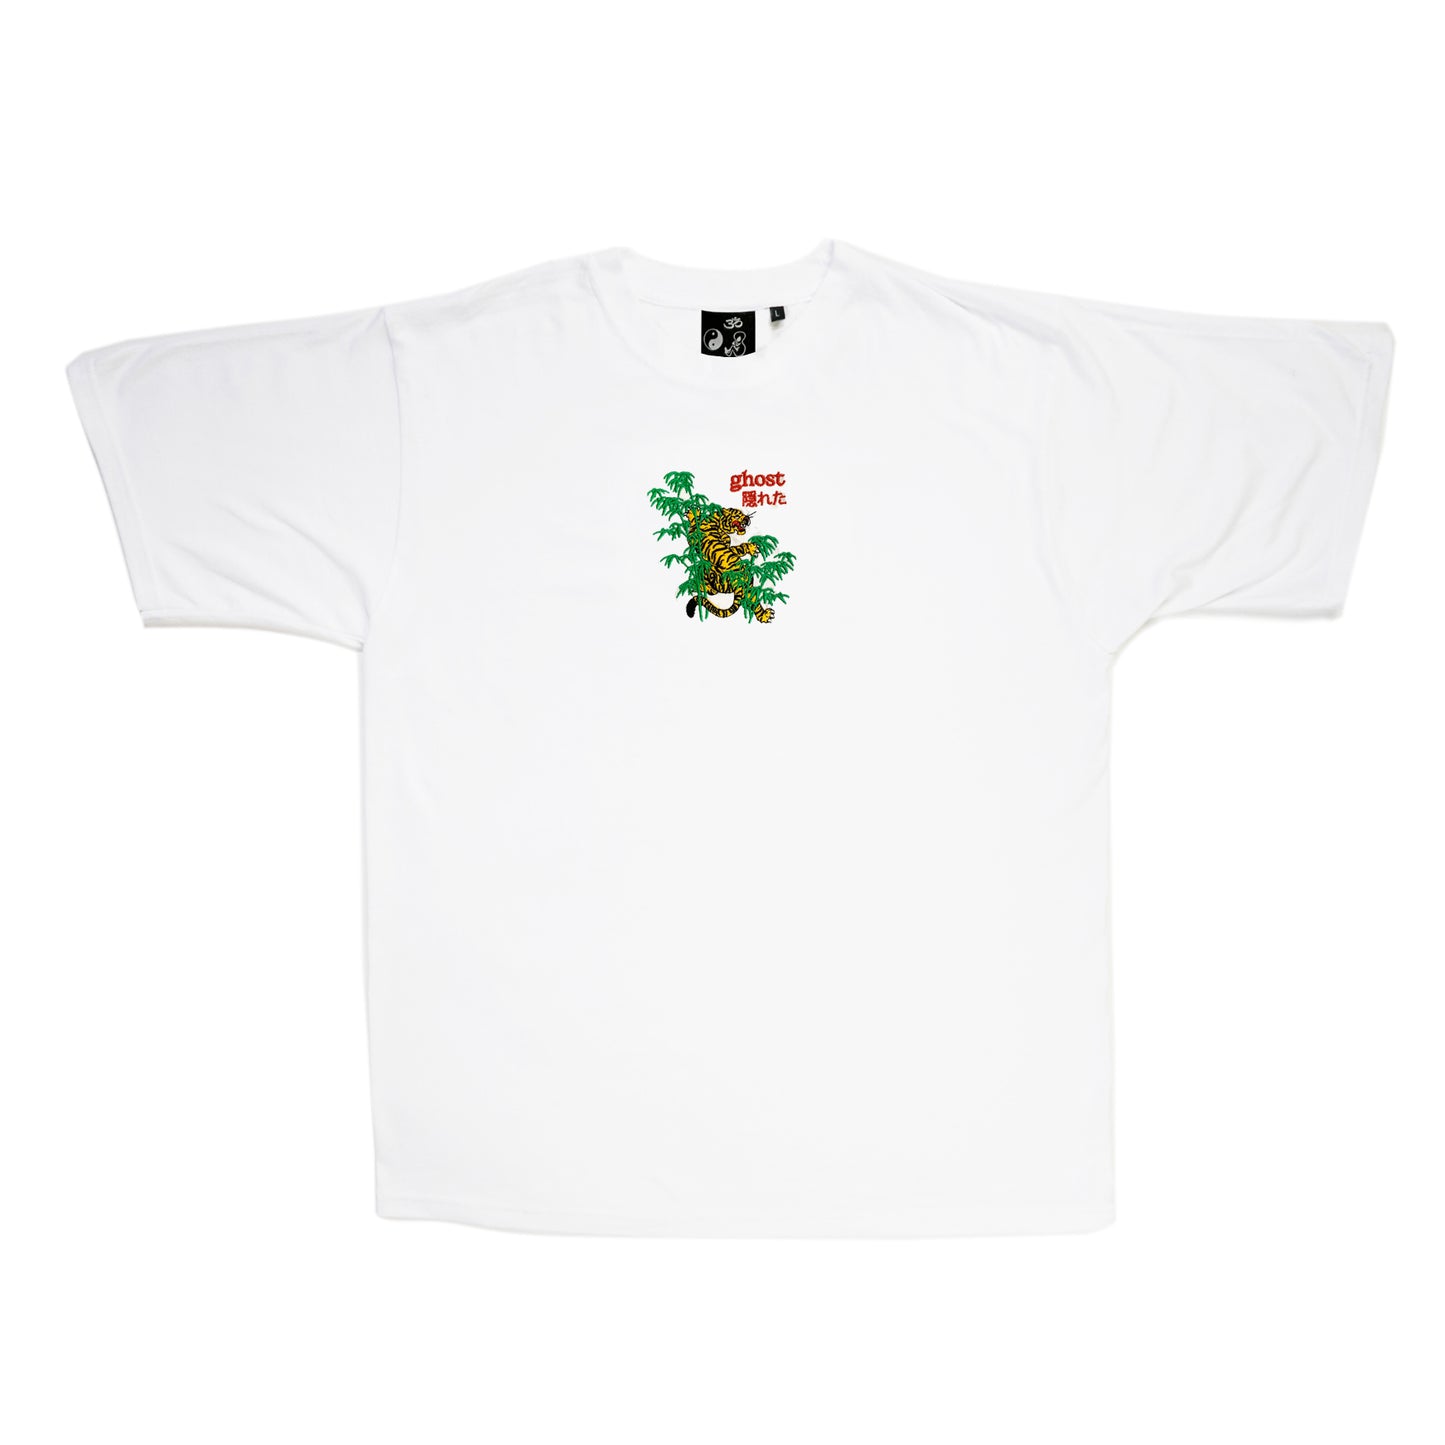 S/S23 Embroidered 'Ghost' T-Shirt {white}